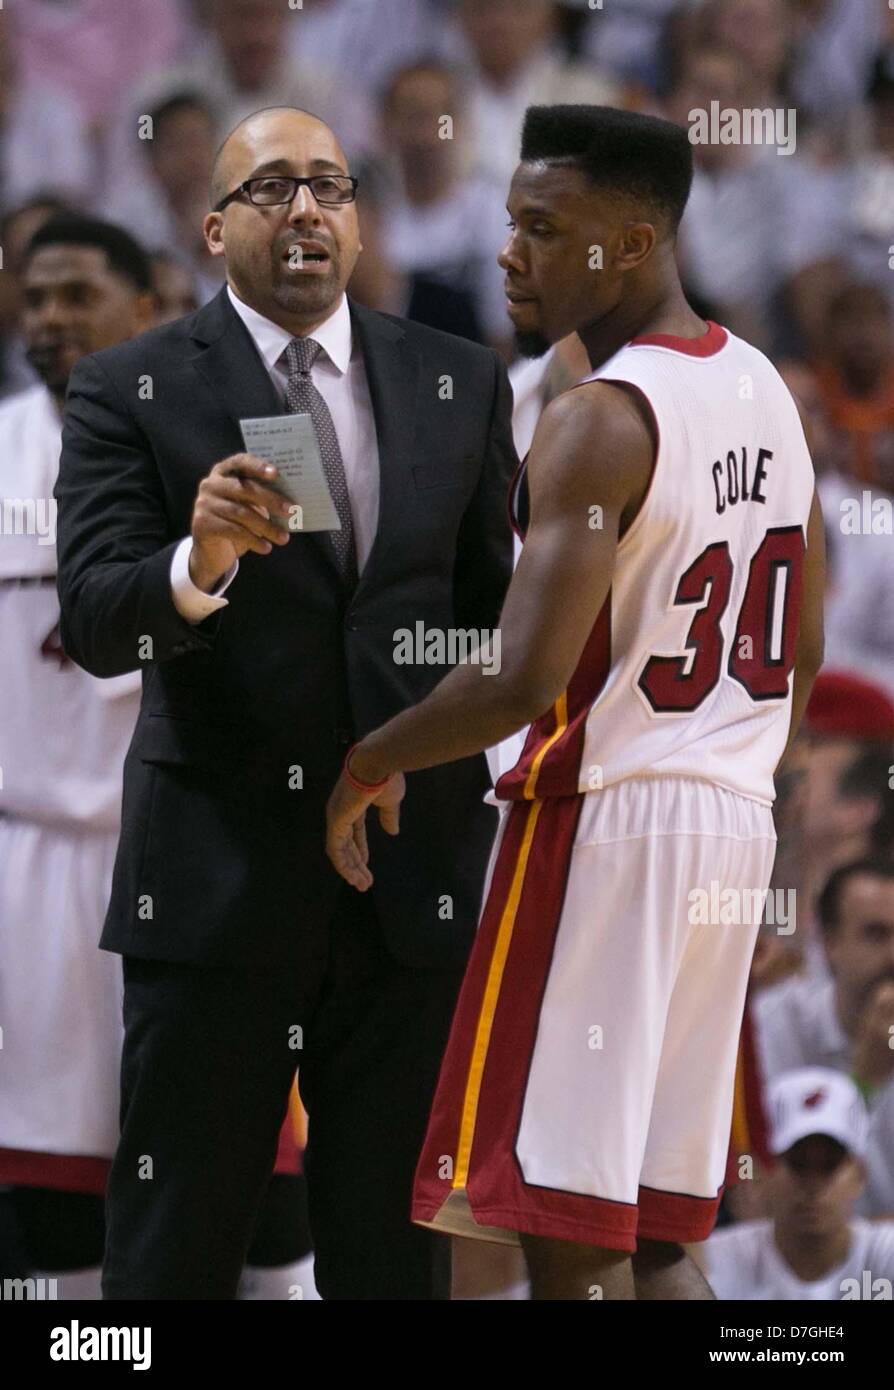 Miami, Florida, USA. 6th May, 2013. Miami Heat assistant coach David  Fizdale talks with Miami Heat point guard Norris Cole (30) during a timeout  at AmericanAirlines Arena in Miami on May 6,